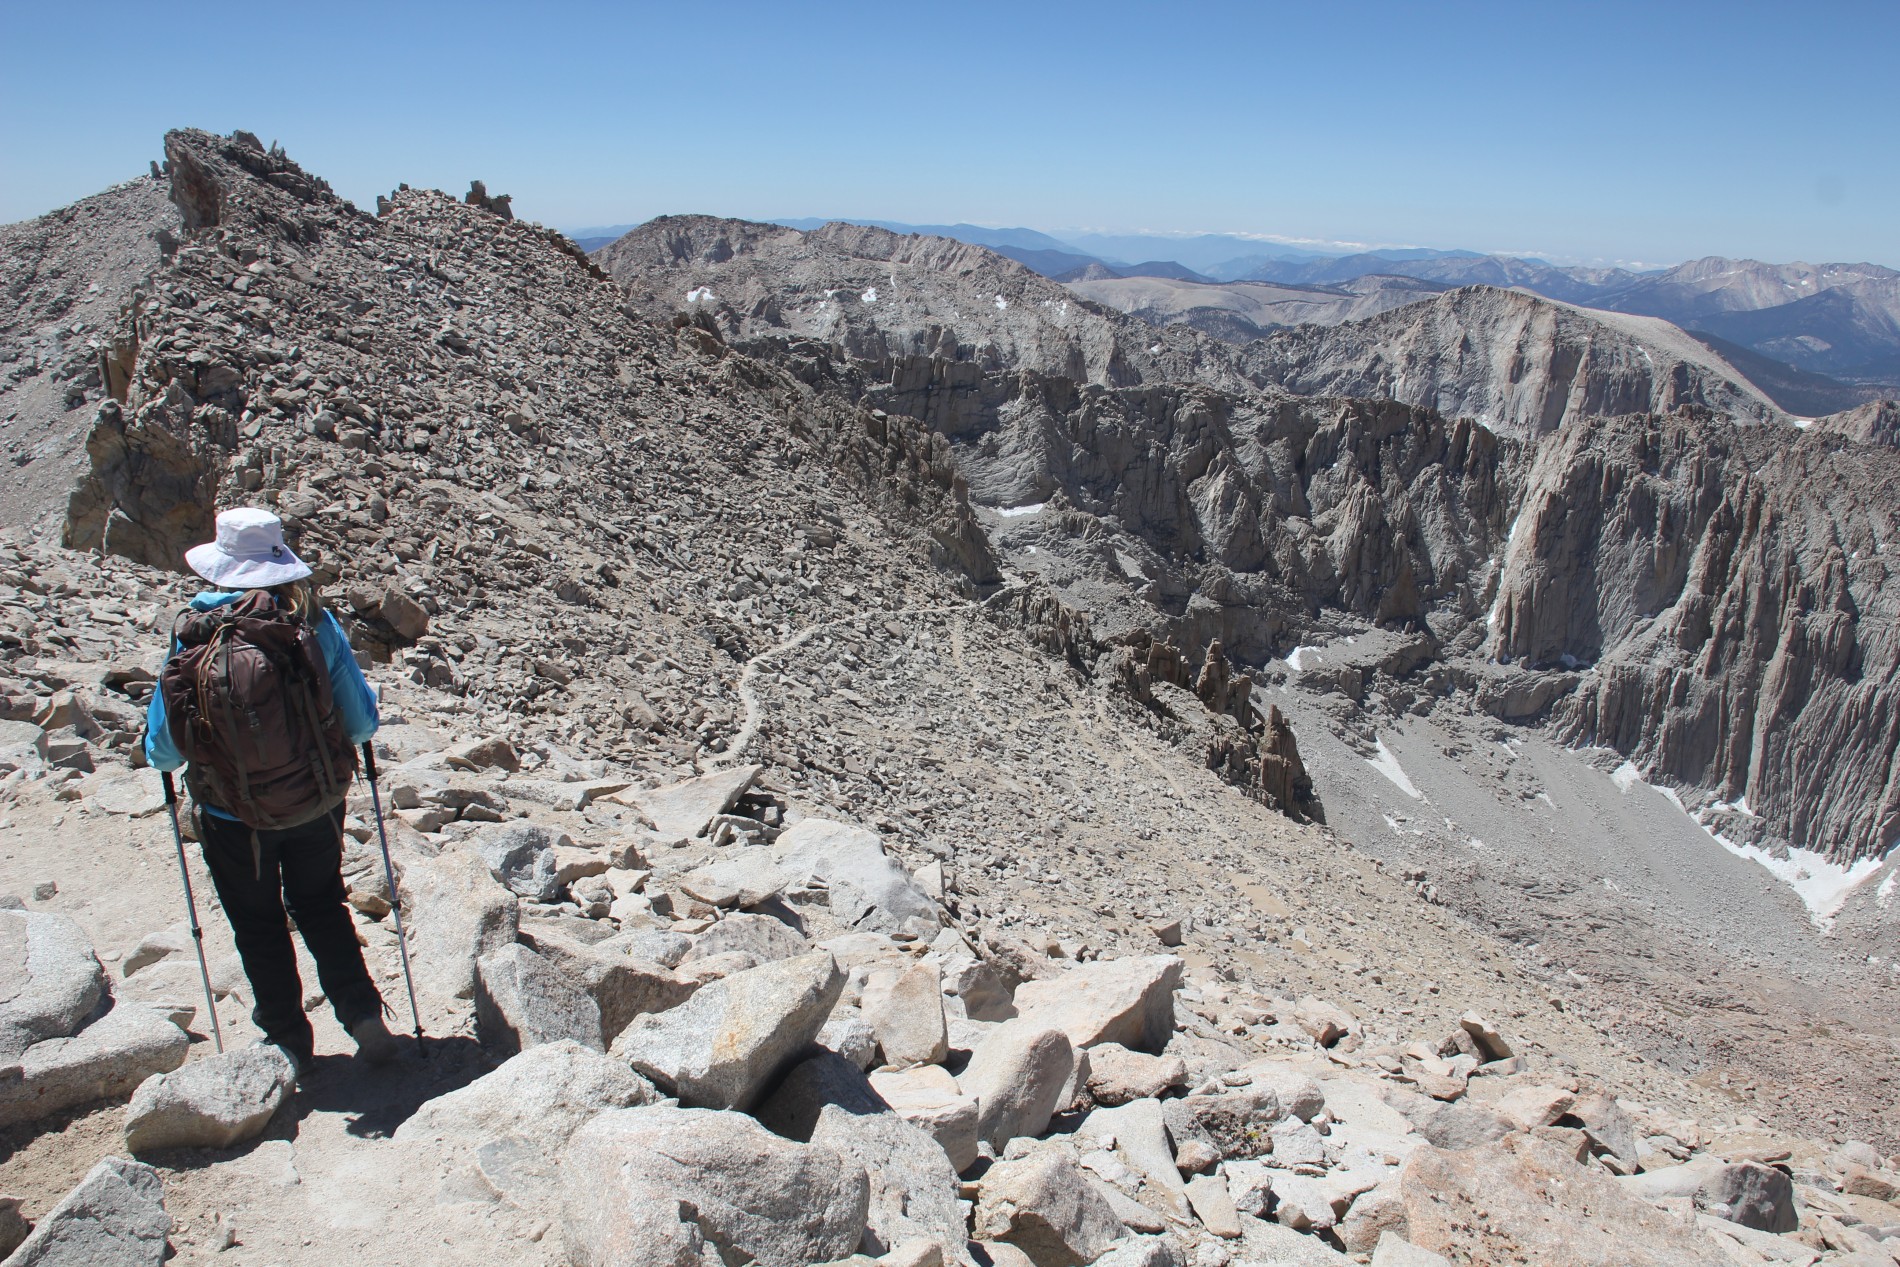 A hiker looks at the trail down from the Mount Whitney summit.